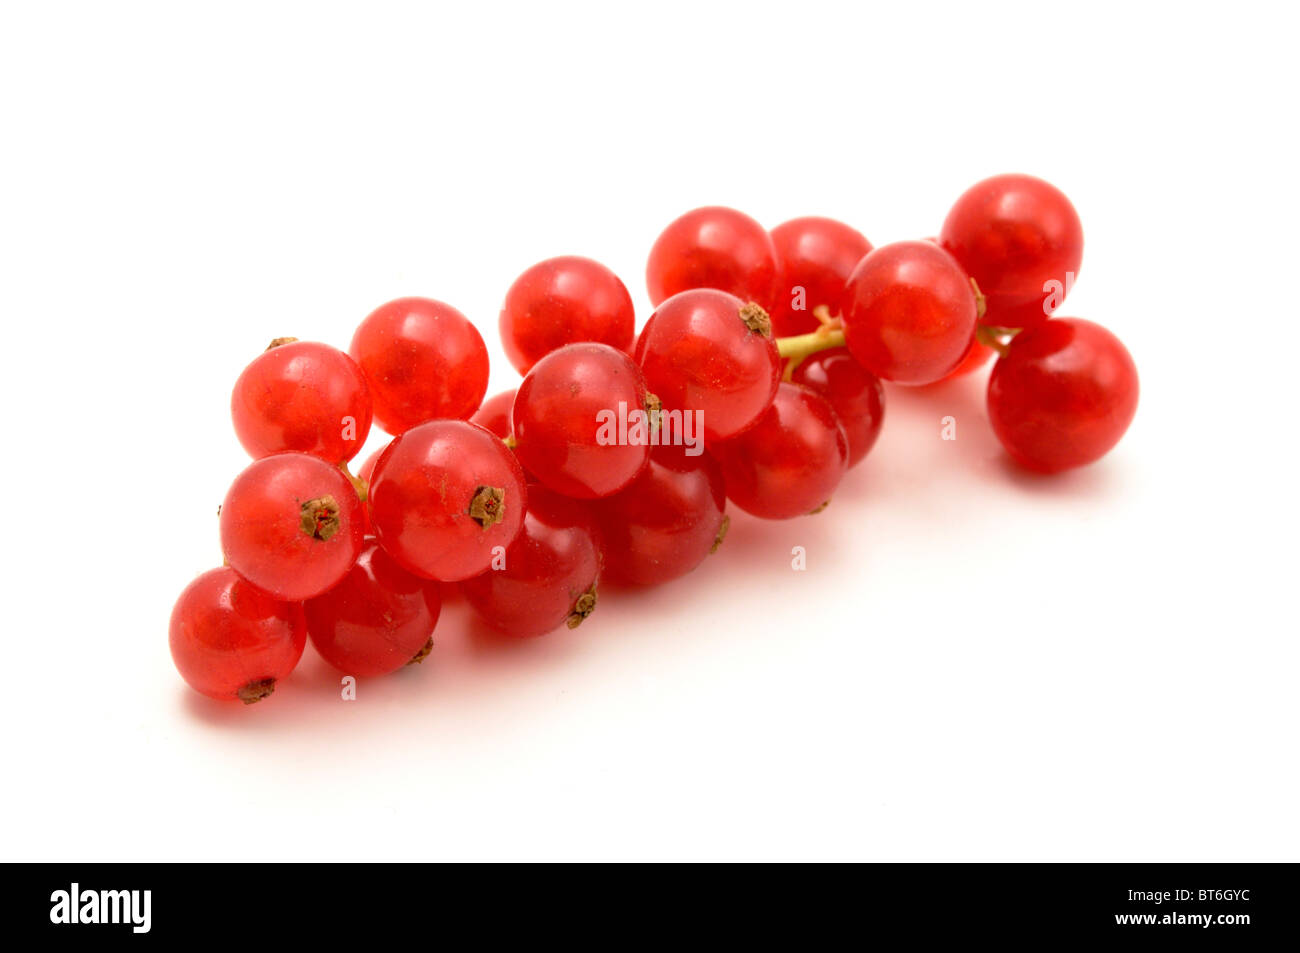 Red currant on a white background Stock Photo